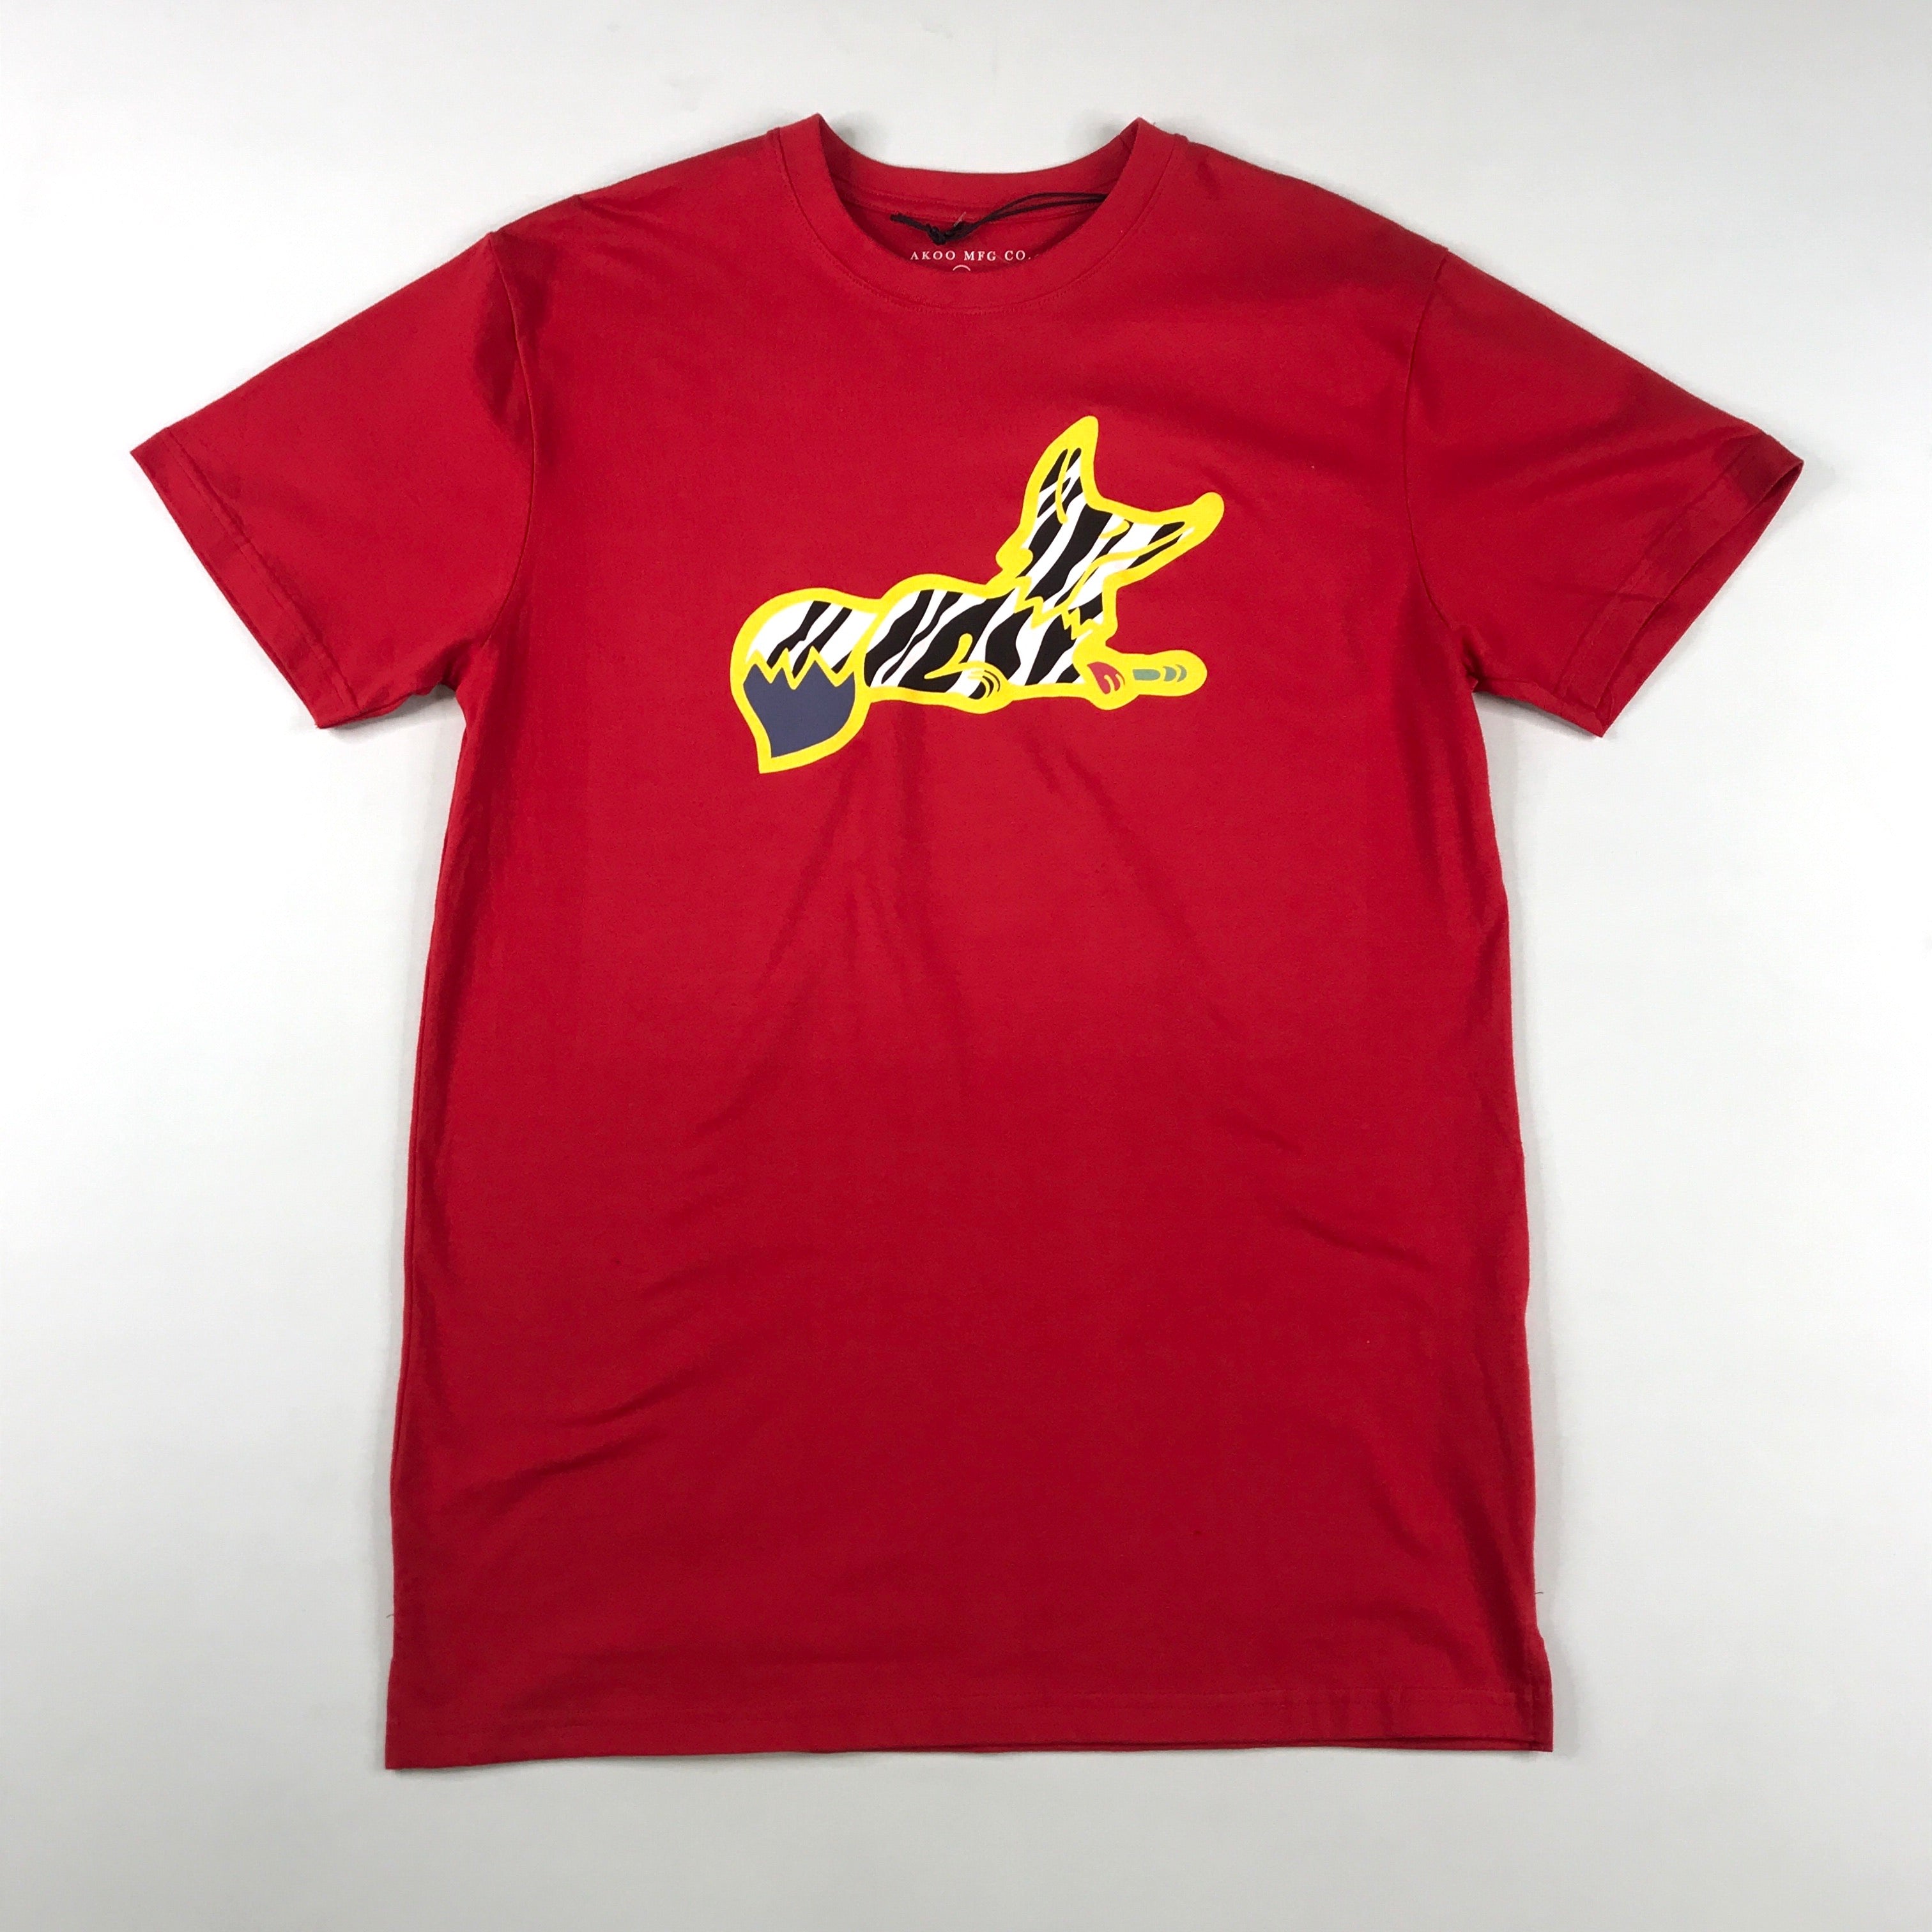 Akoo “jungle room snobby” tee in red